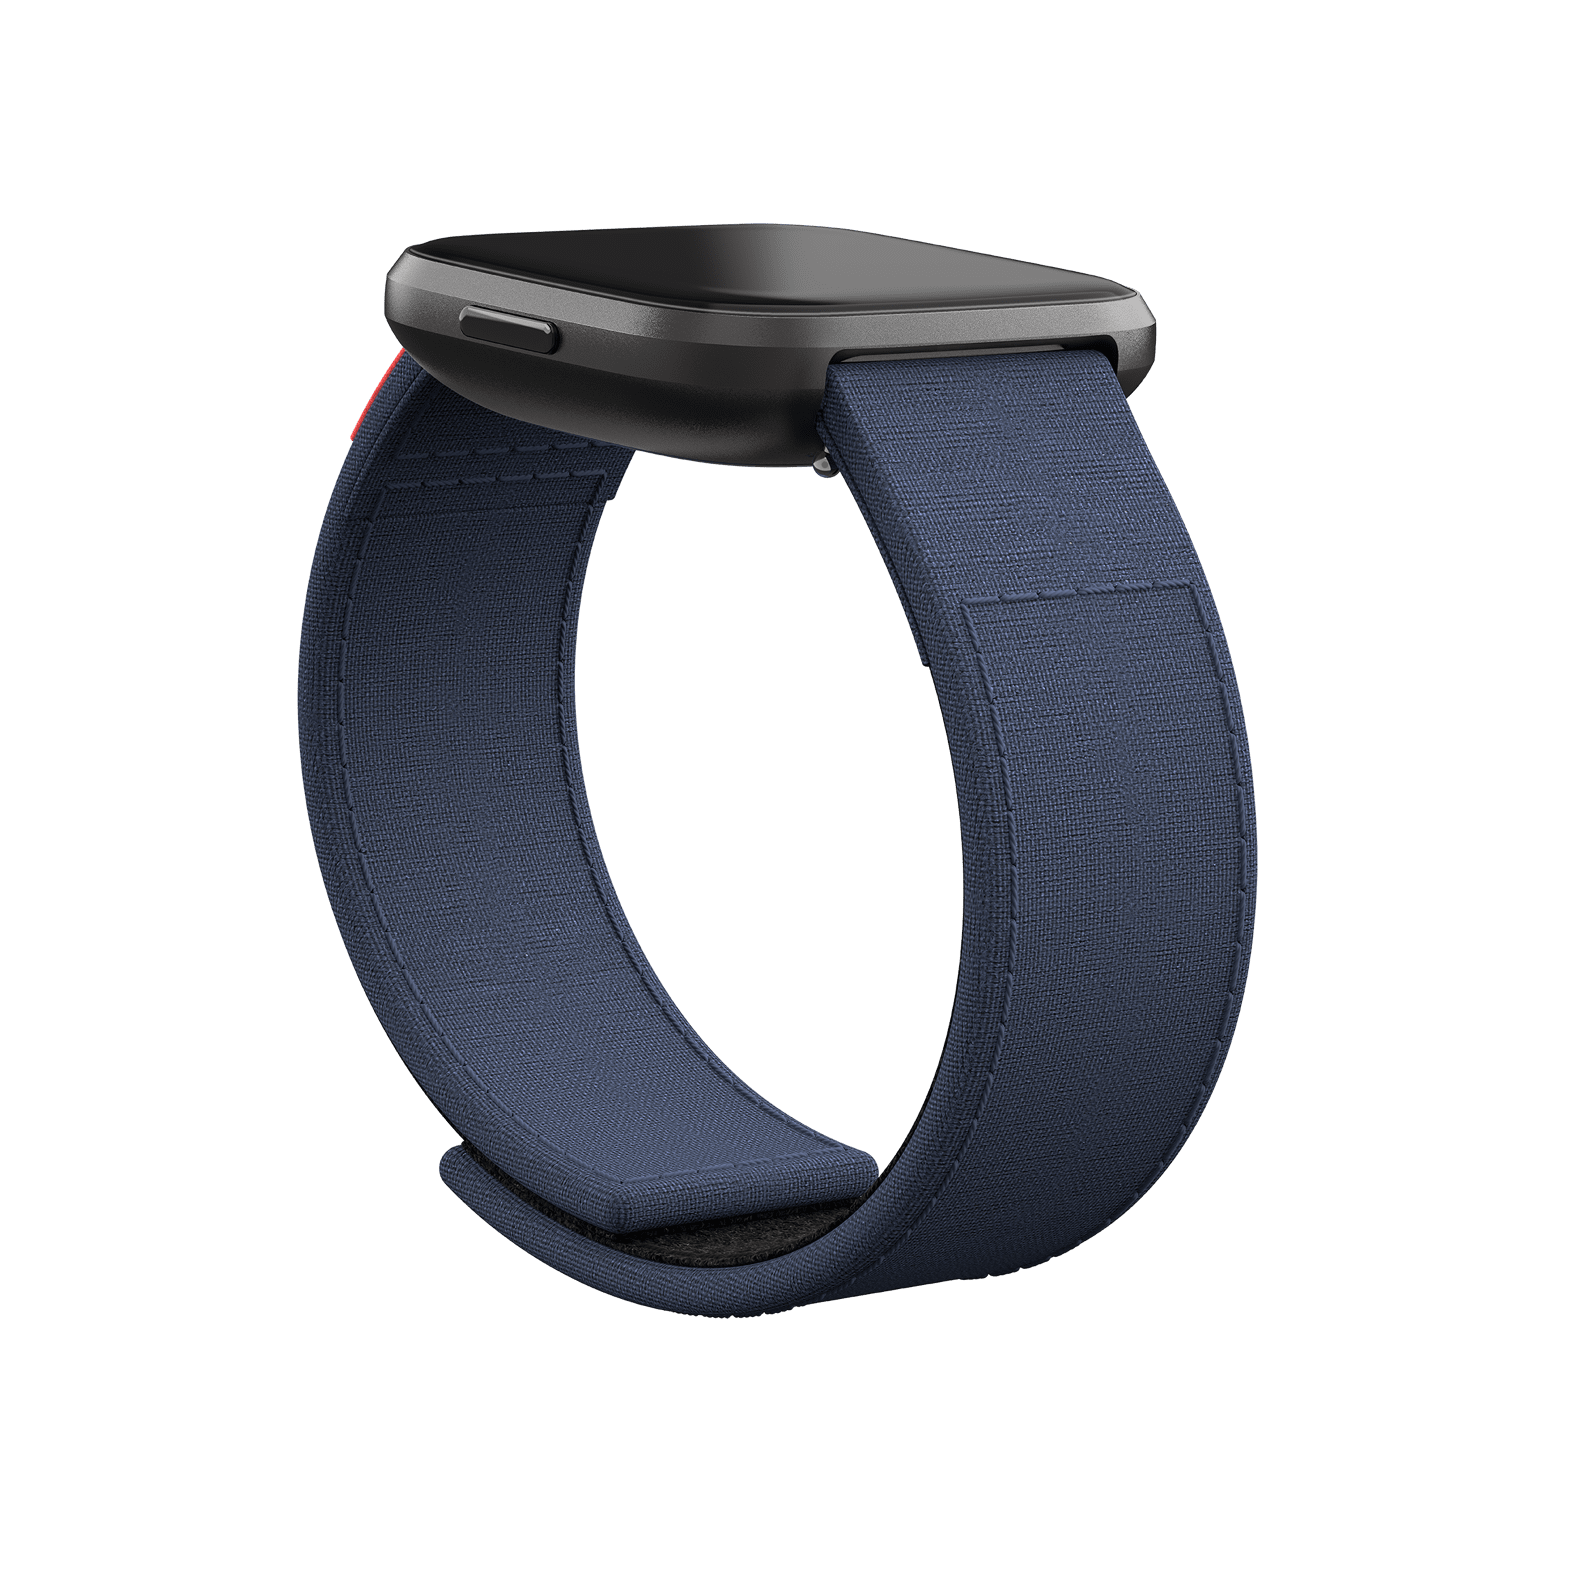 fitbit versa family recco woven band